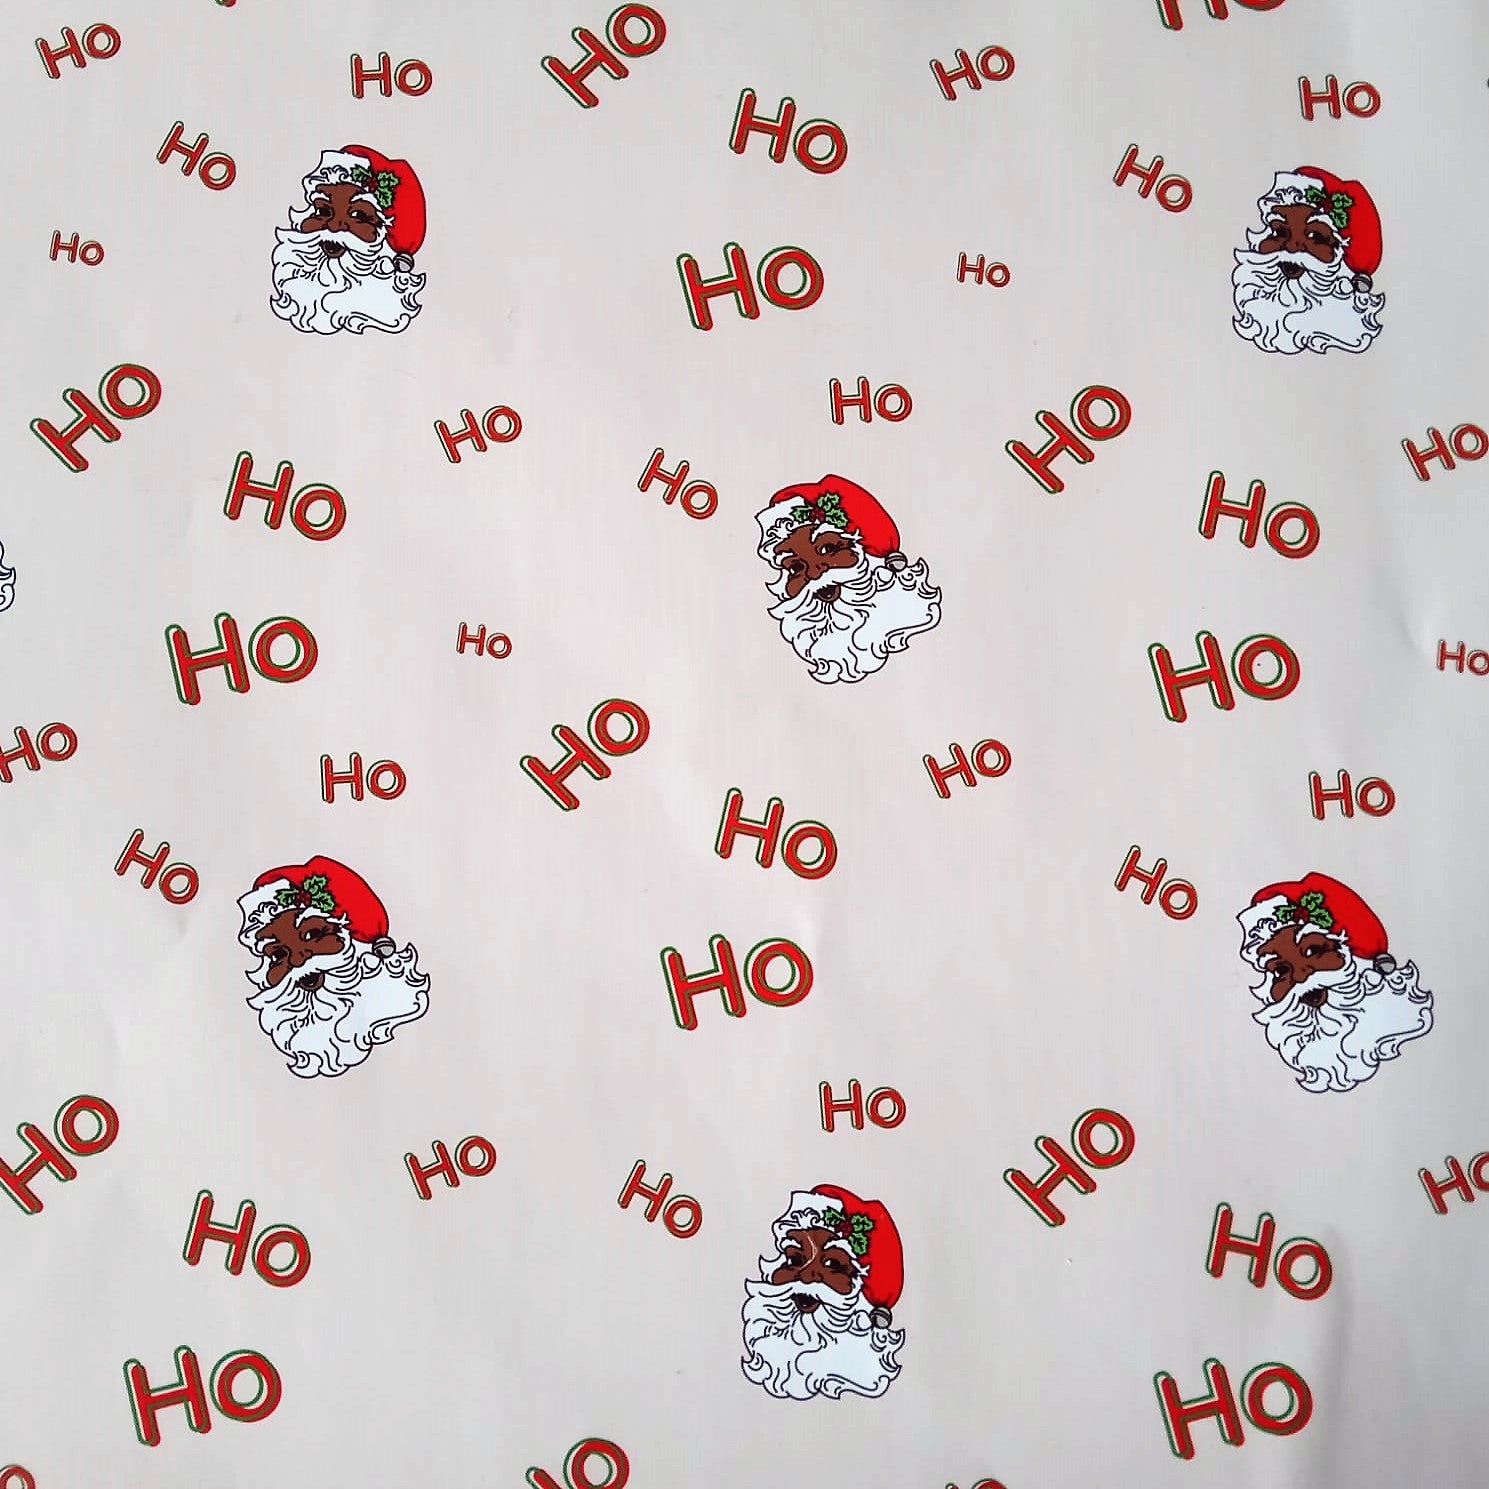 Luxury Gift Wrap & Washi Tape Set - There's Some Hos In This House - Santa, Christmas Wrapping